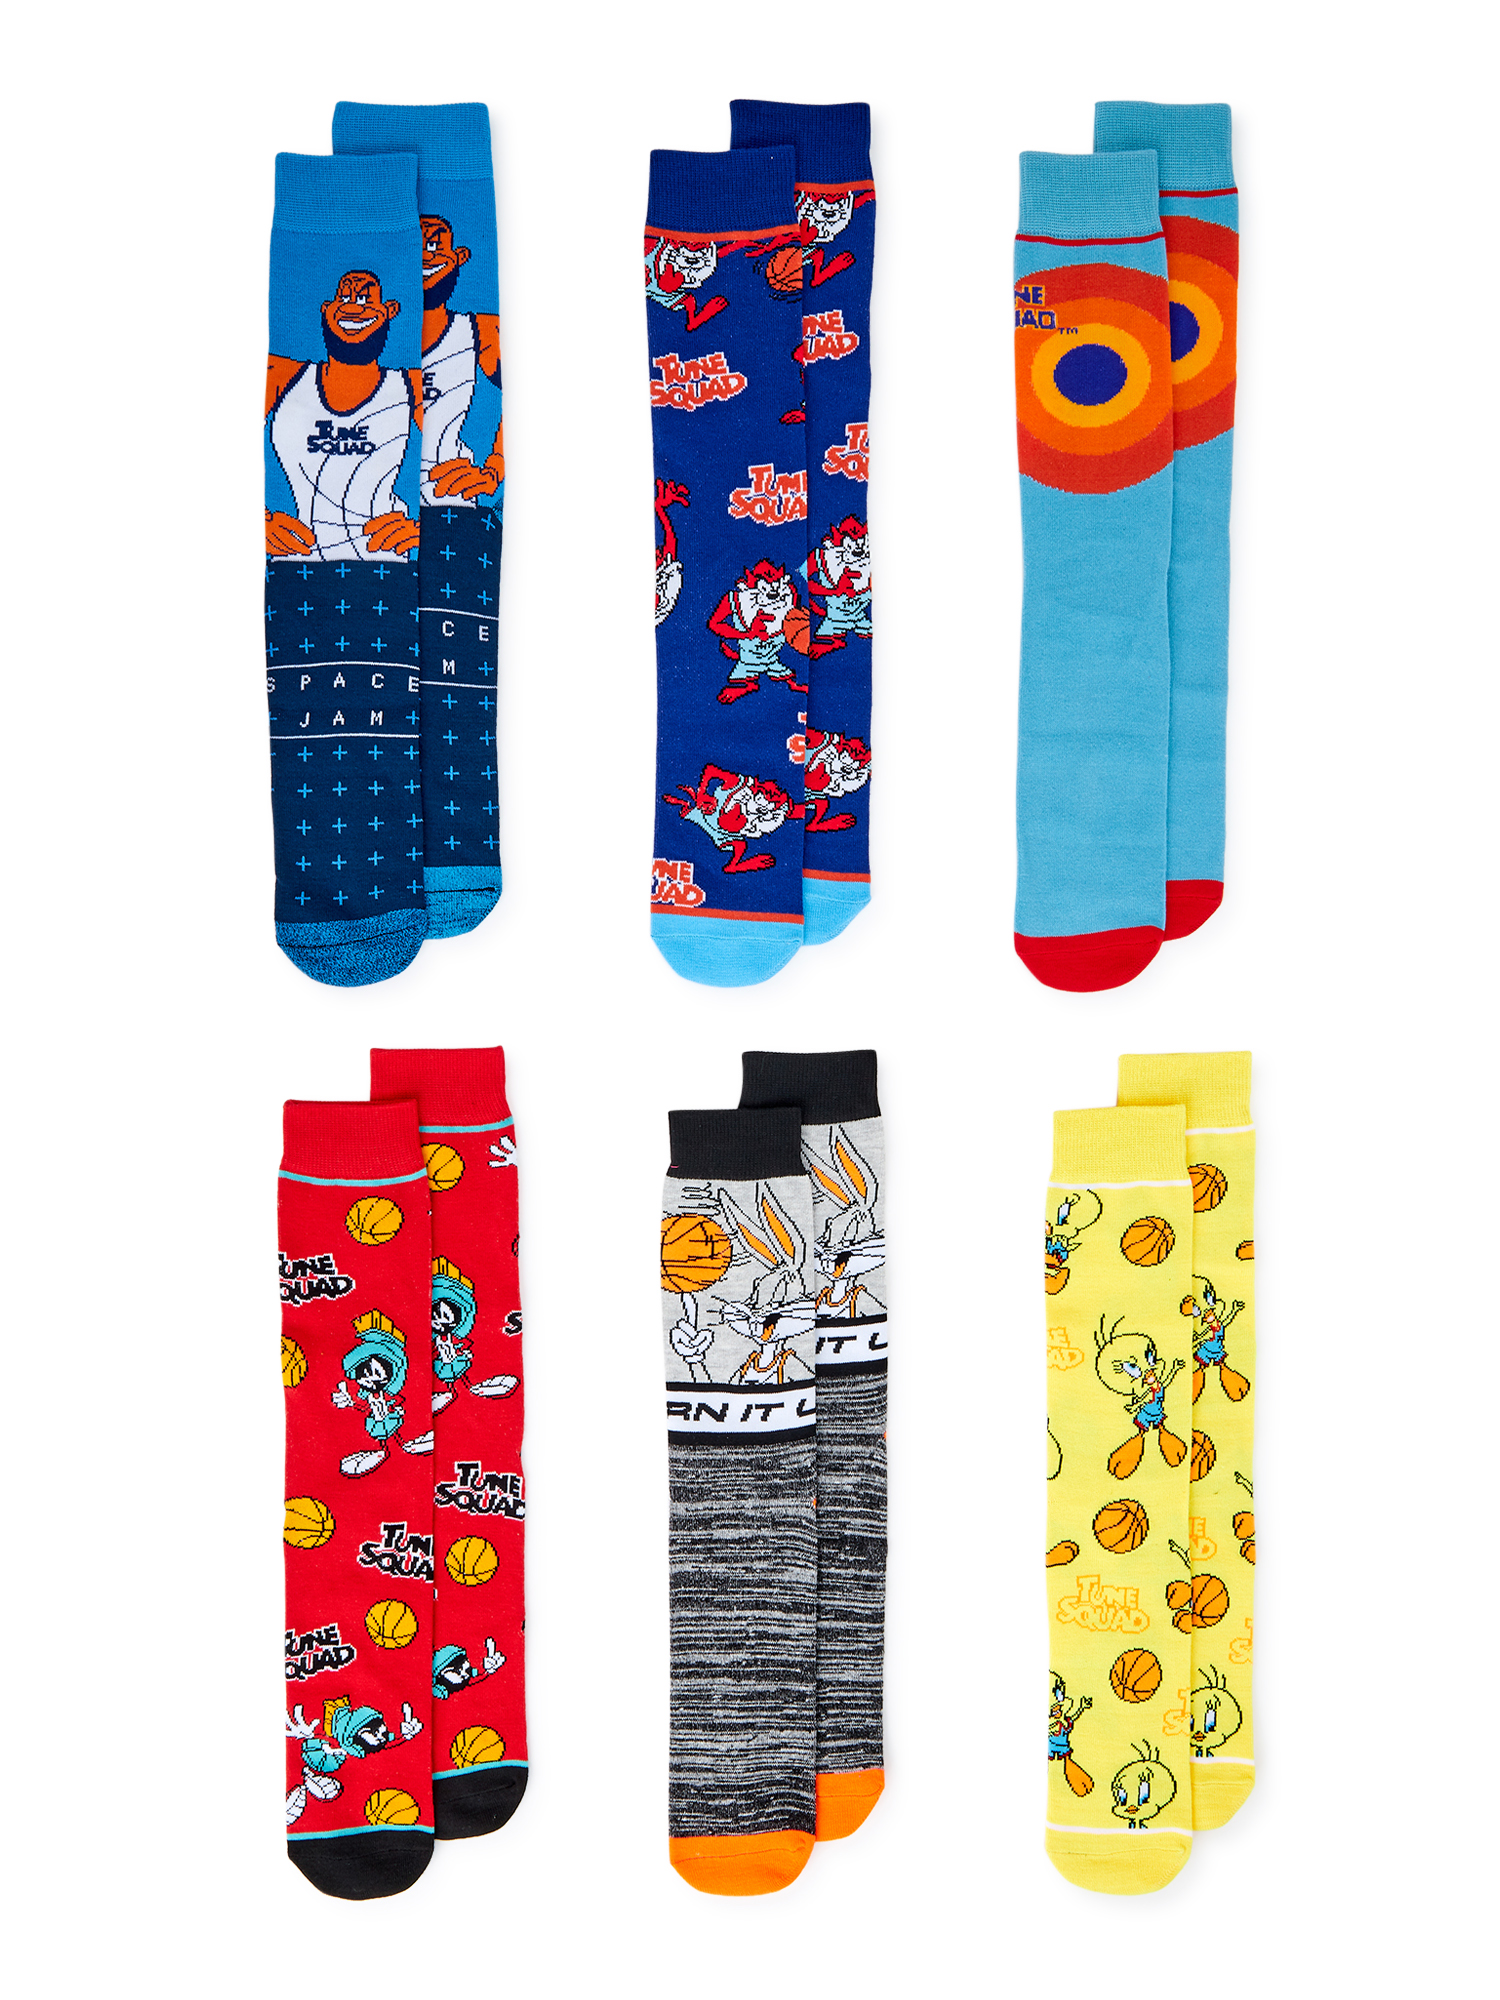 Space Jam: A New Legacy Men’s Crew Socks, 6-Pack - image 1 of 2